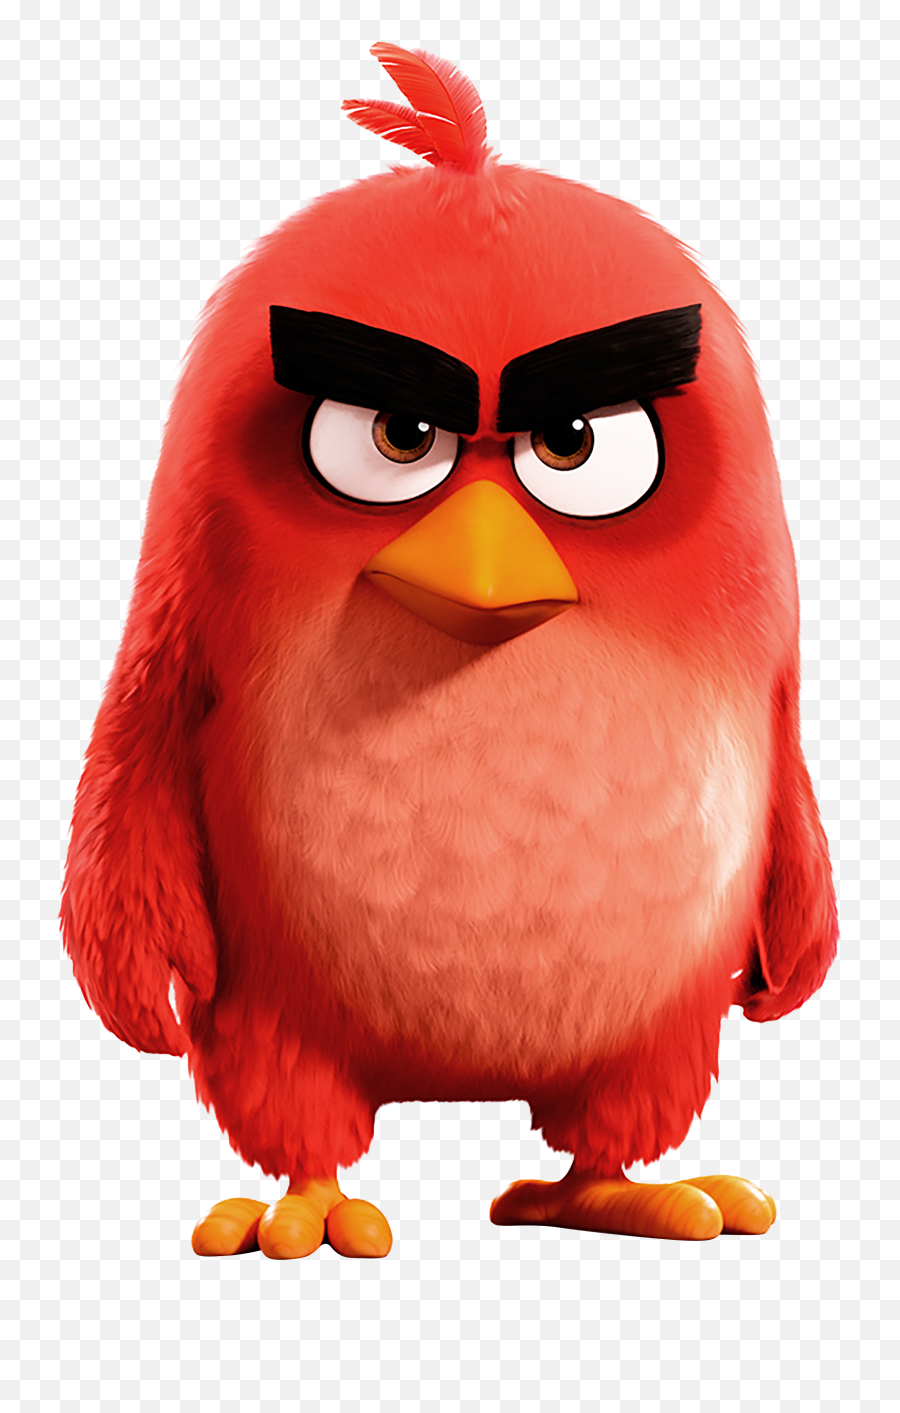 Download Clipart Free Download Anger Clipart Angry Phone - Red Angry Birds Emoji,Red Angry Emoji